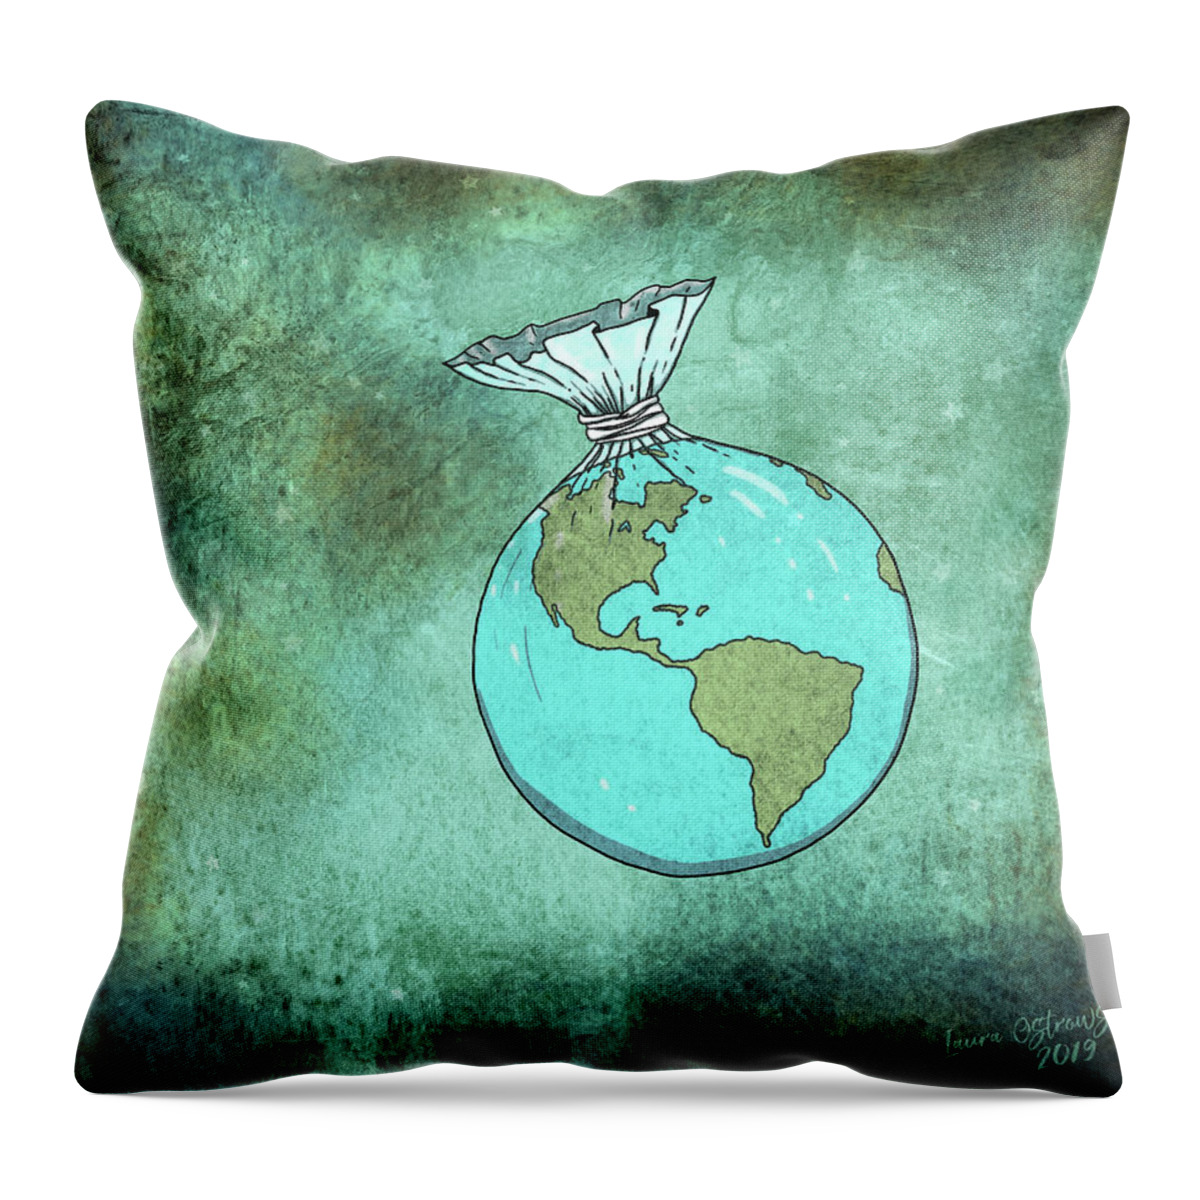 Plastic Planet Throw Pillow featuring the digital art Plastic Planet by Laura Ostrowski